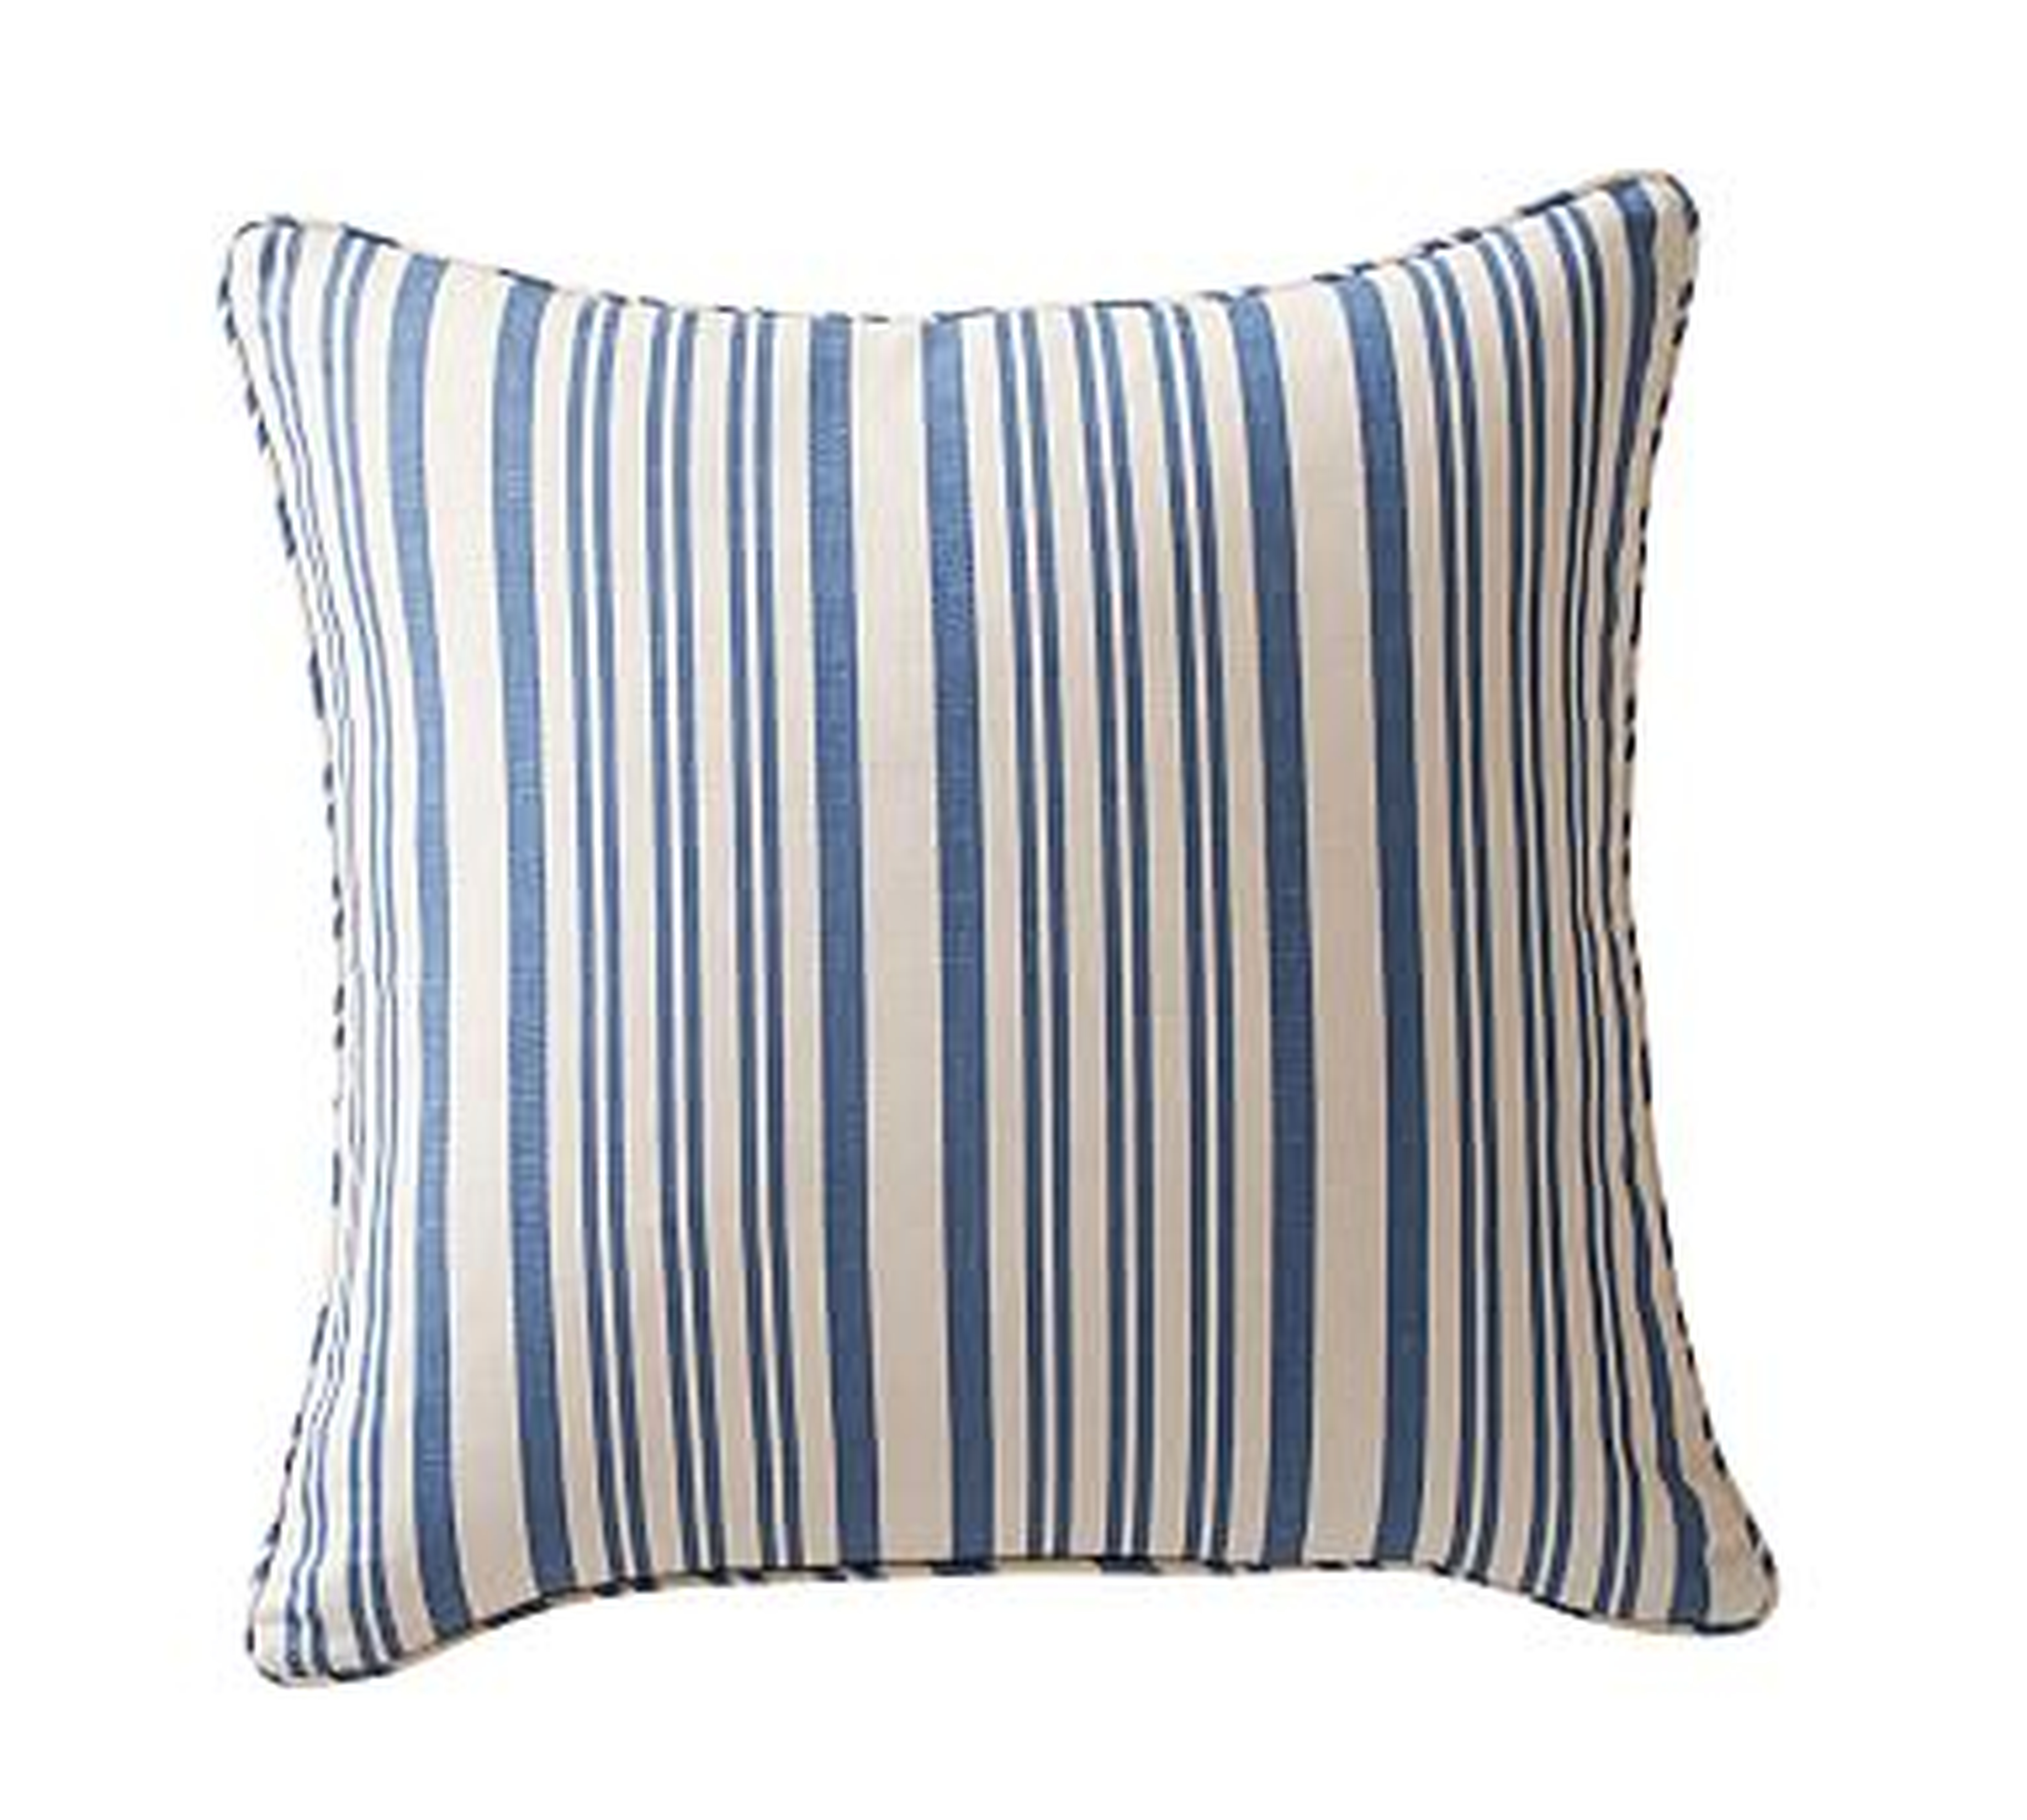 Antique Striped Print Pillow Cover, 20", Blue - Pottery Barn